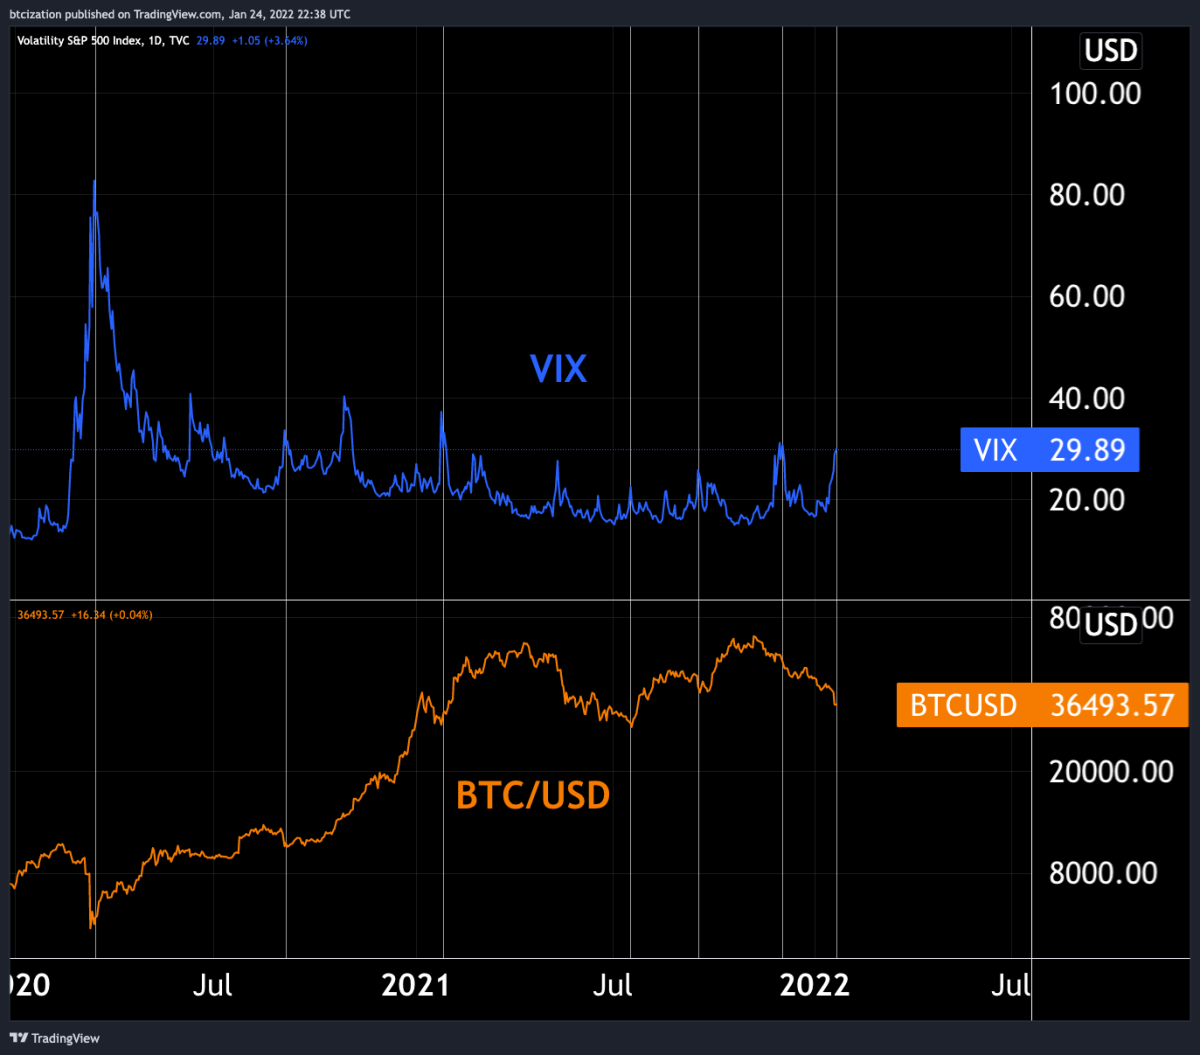 A look at how macroeconomic volatility spikes are impacting the bitcoin price.